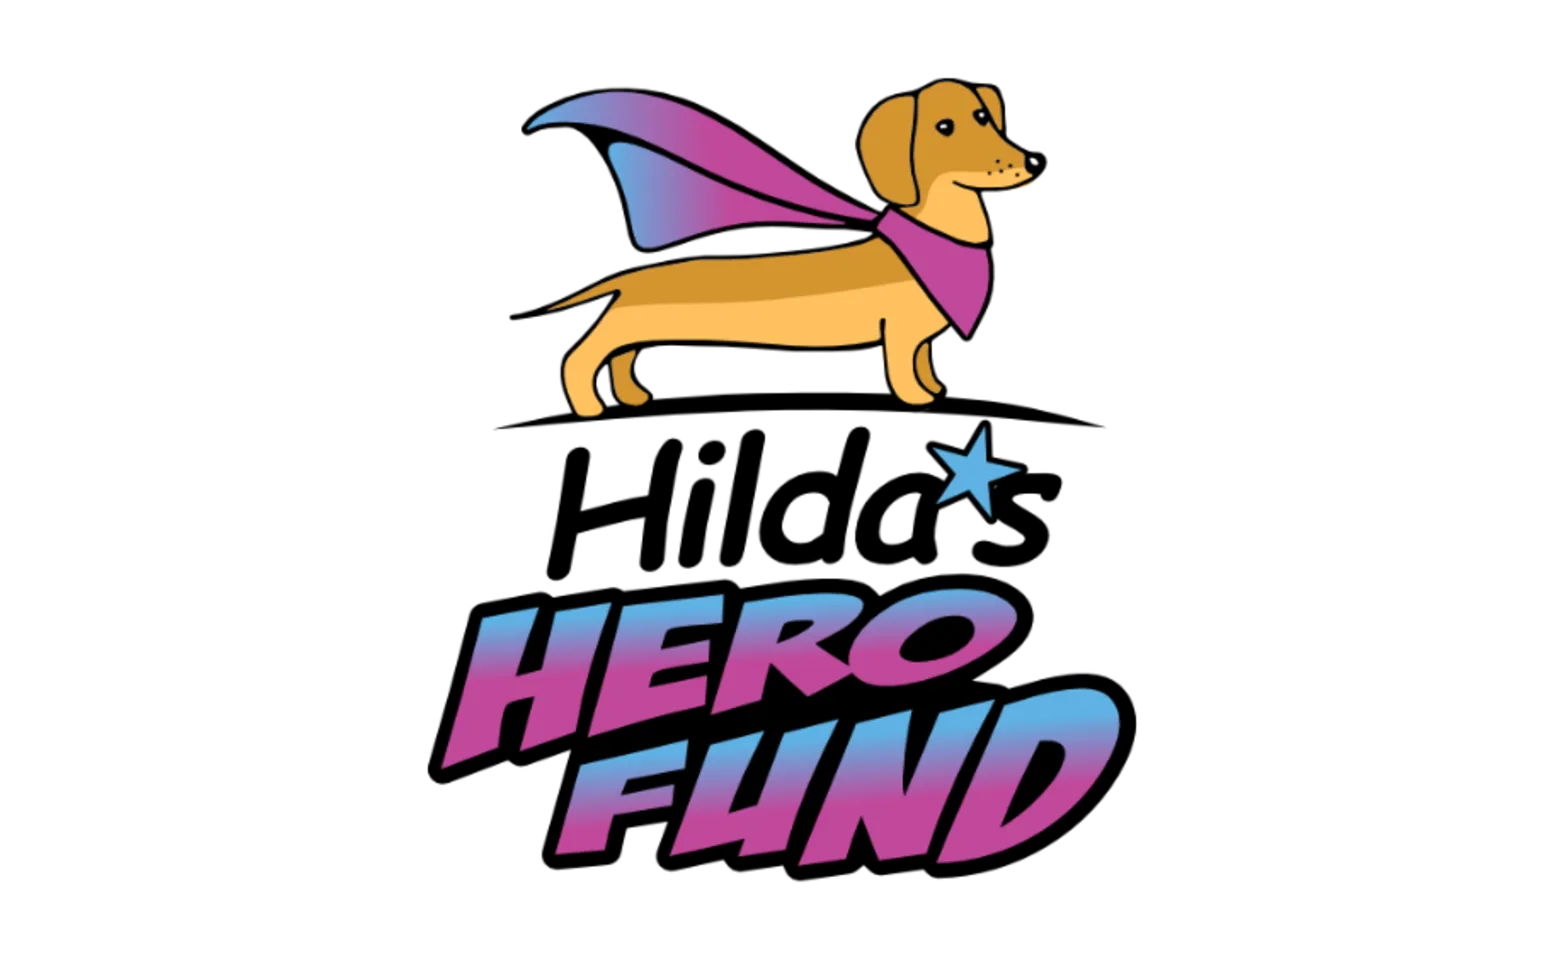 Logo for The Hilda's Hero Fund (Dachshund with cape)